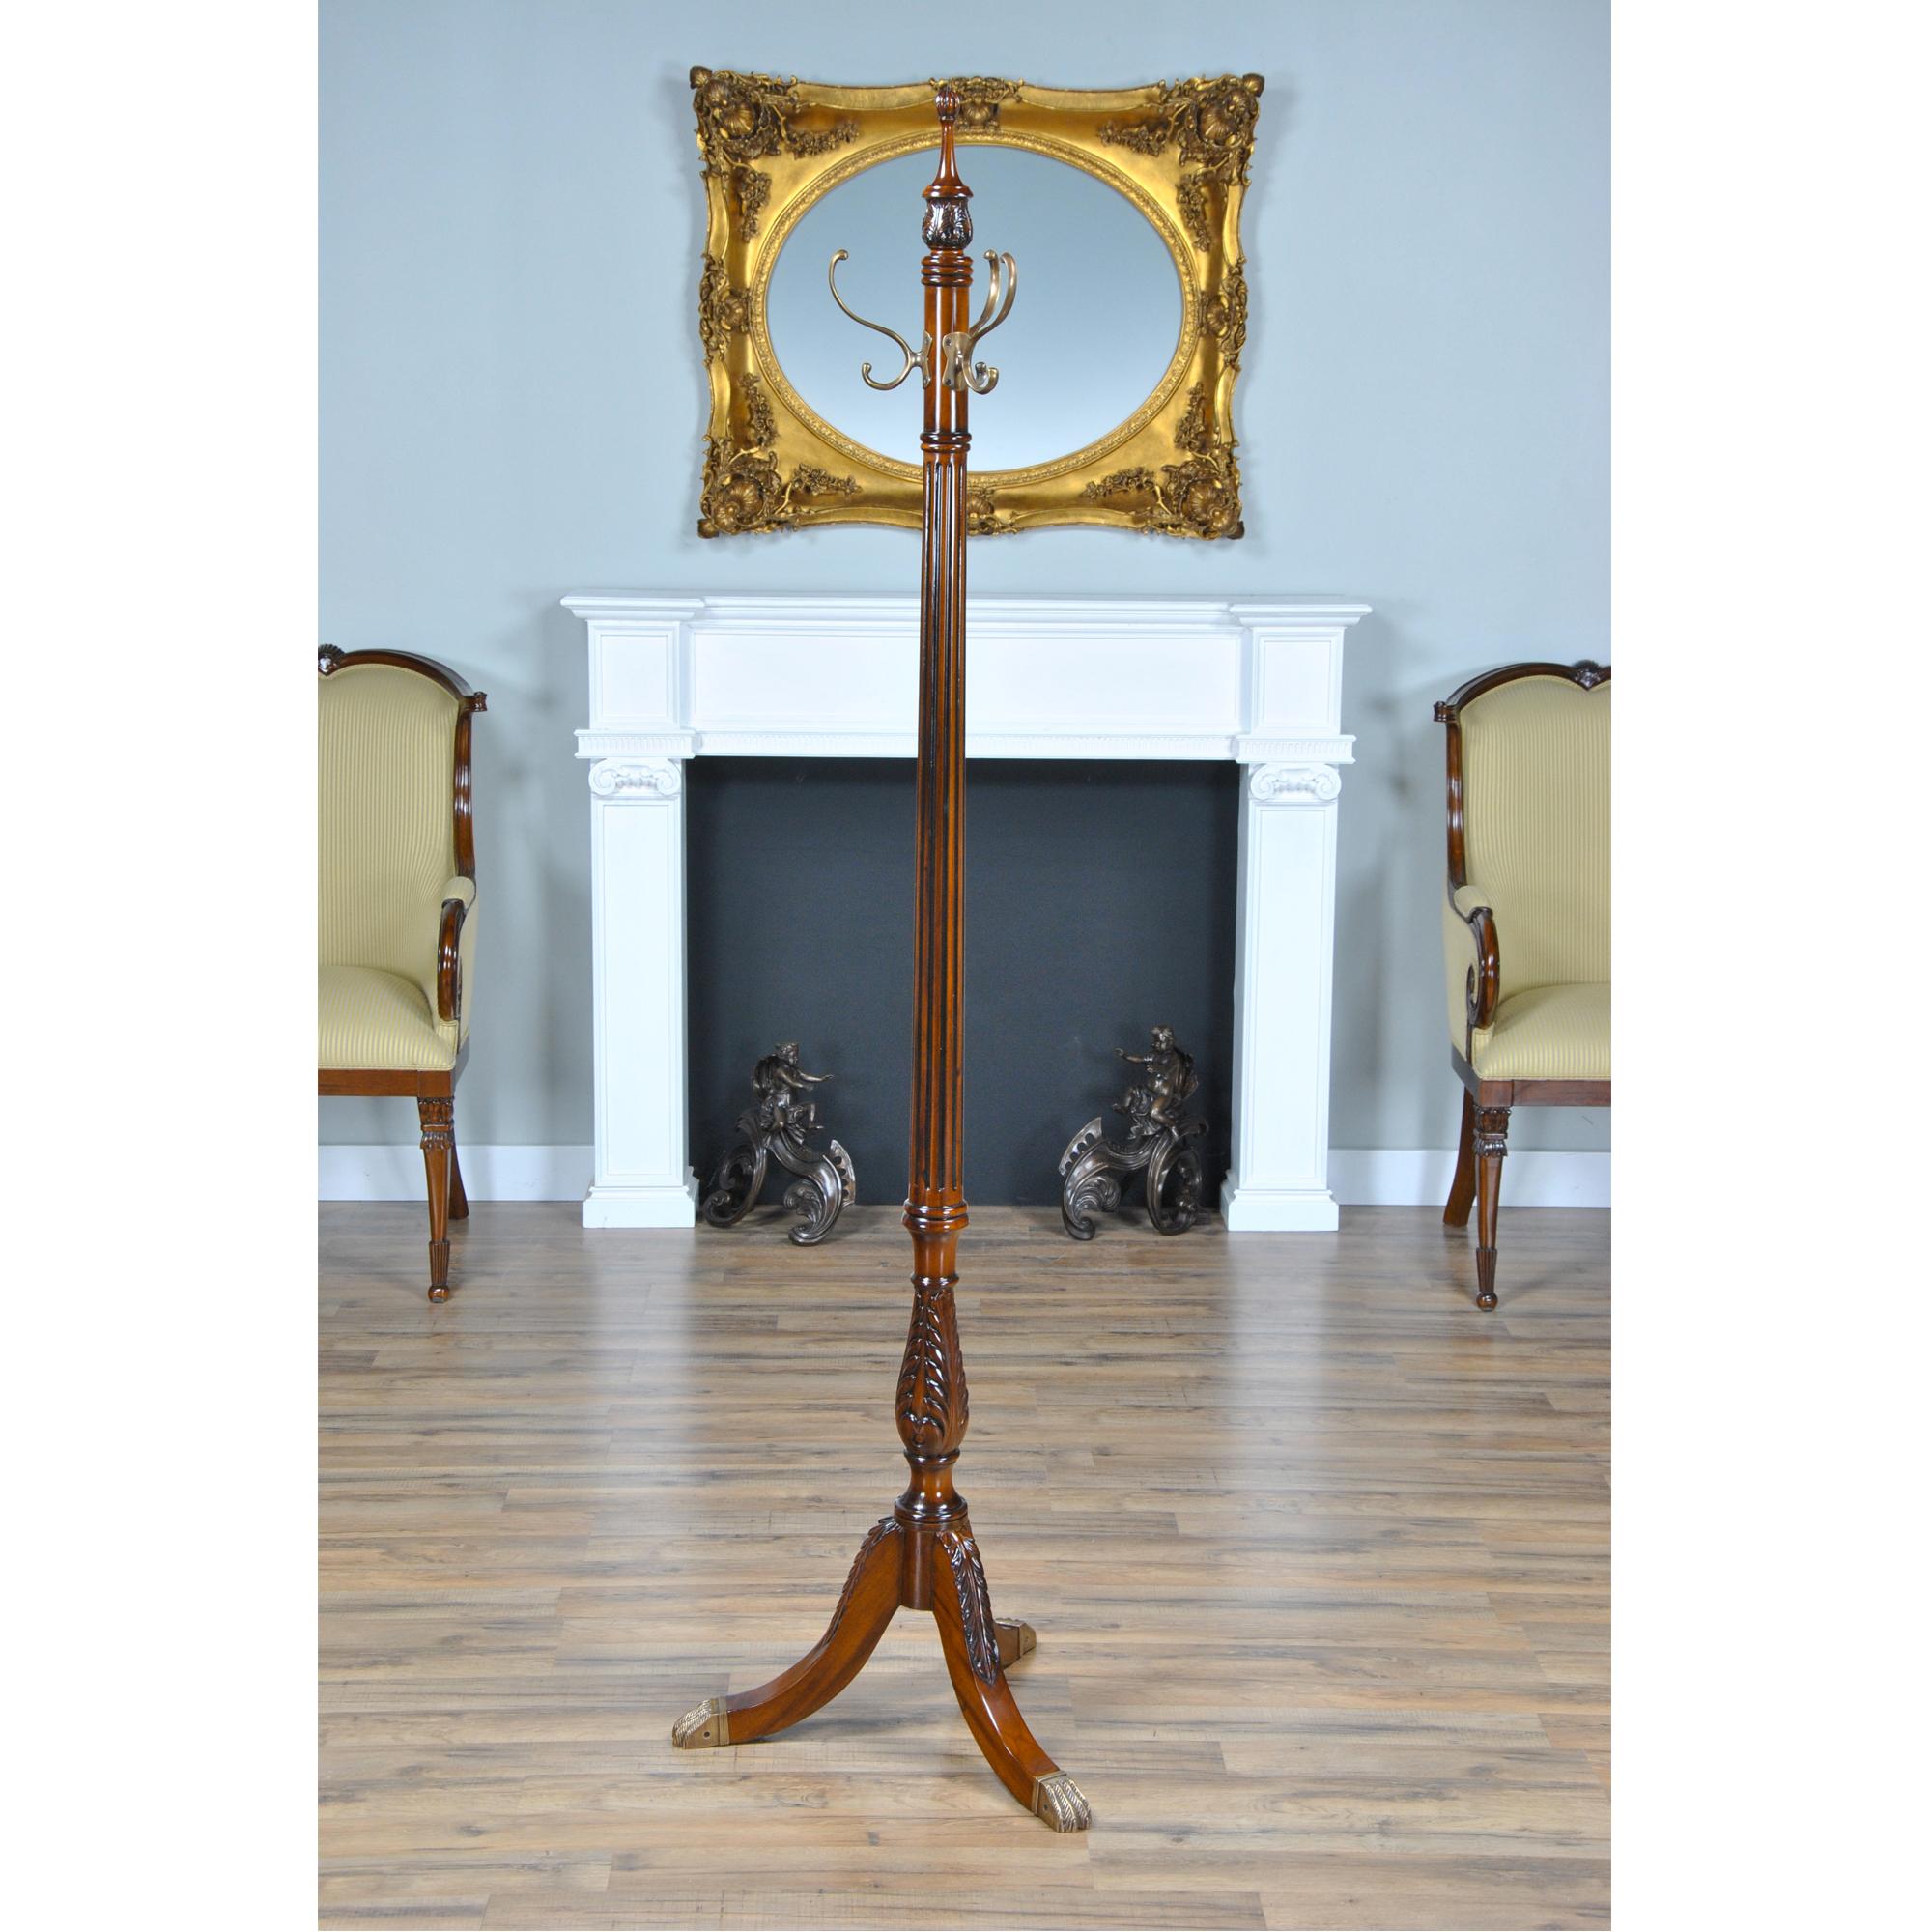 A Mahogany Coat Tree in Sheraton style features include solid mahogany construction with hand carved details throughout. The mahogany is harvested from plantation grown, sustainably harvested trees and the carvings are executed by our skilled